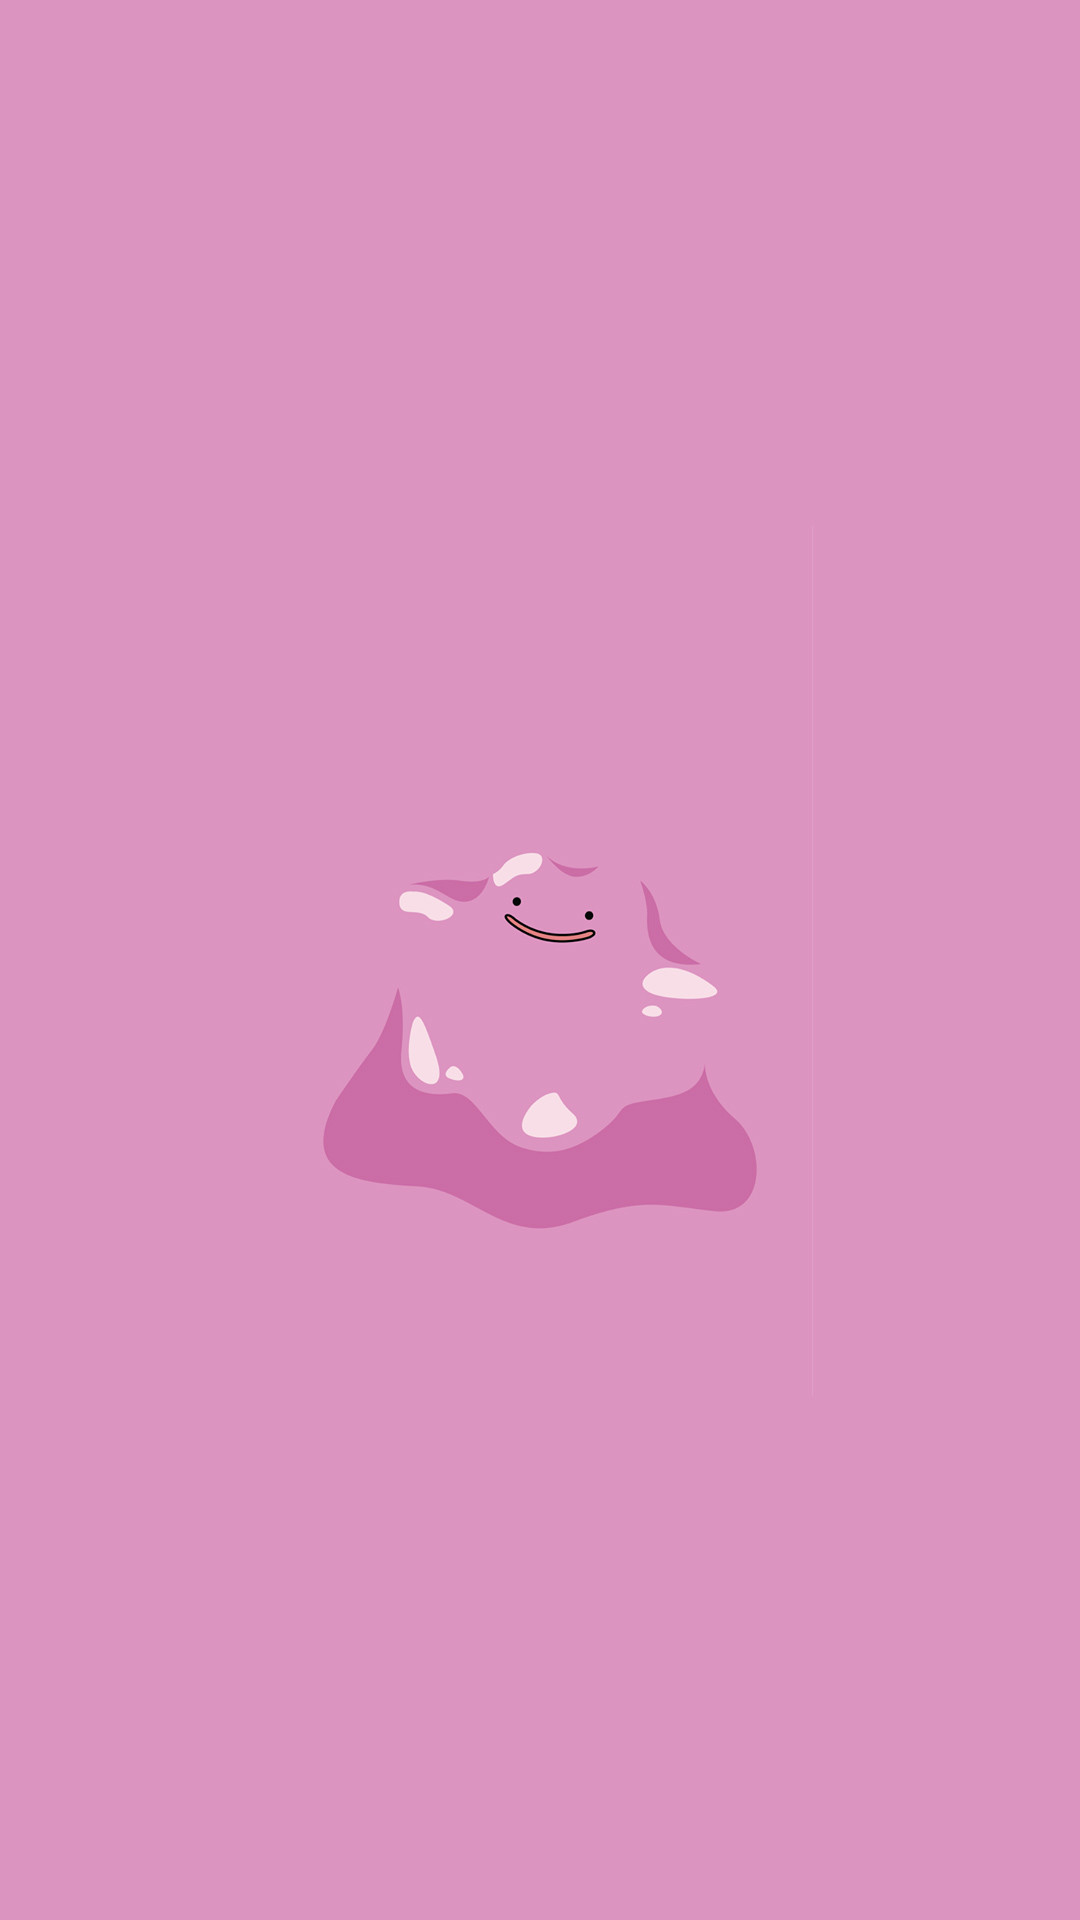 1080x1920 Ditto Pokemon Character iPhone 6+ HD Wallpaper - http://freebestpicture.com